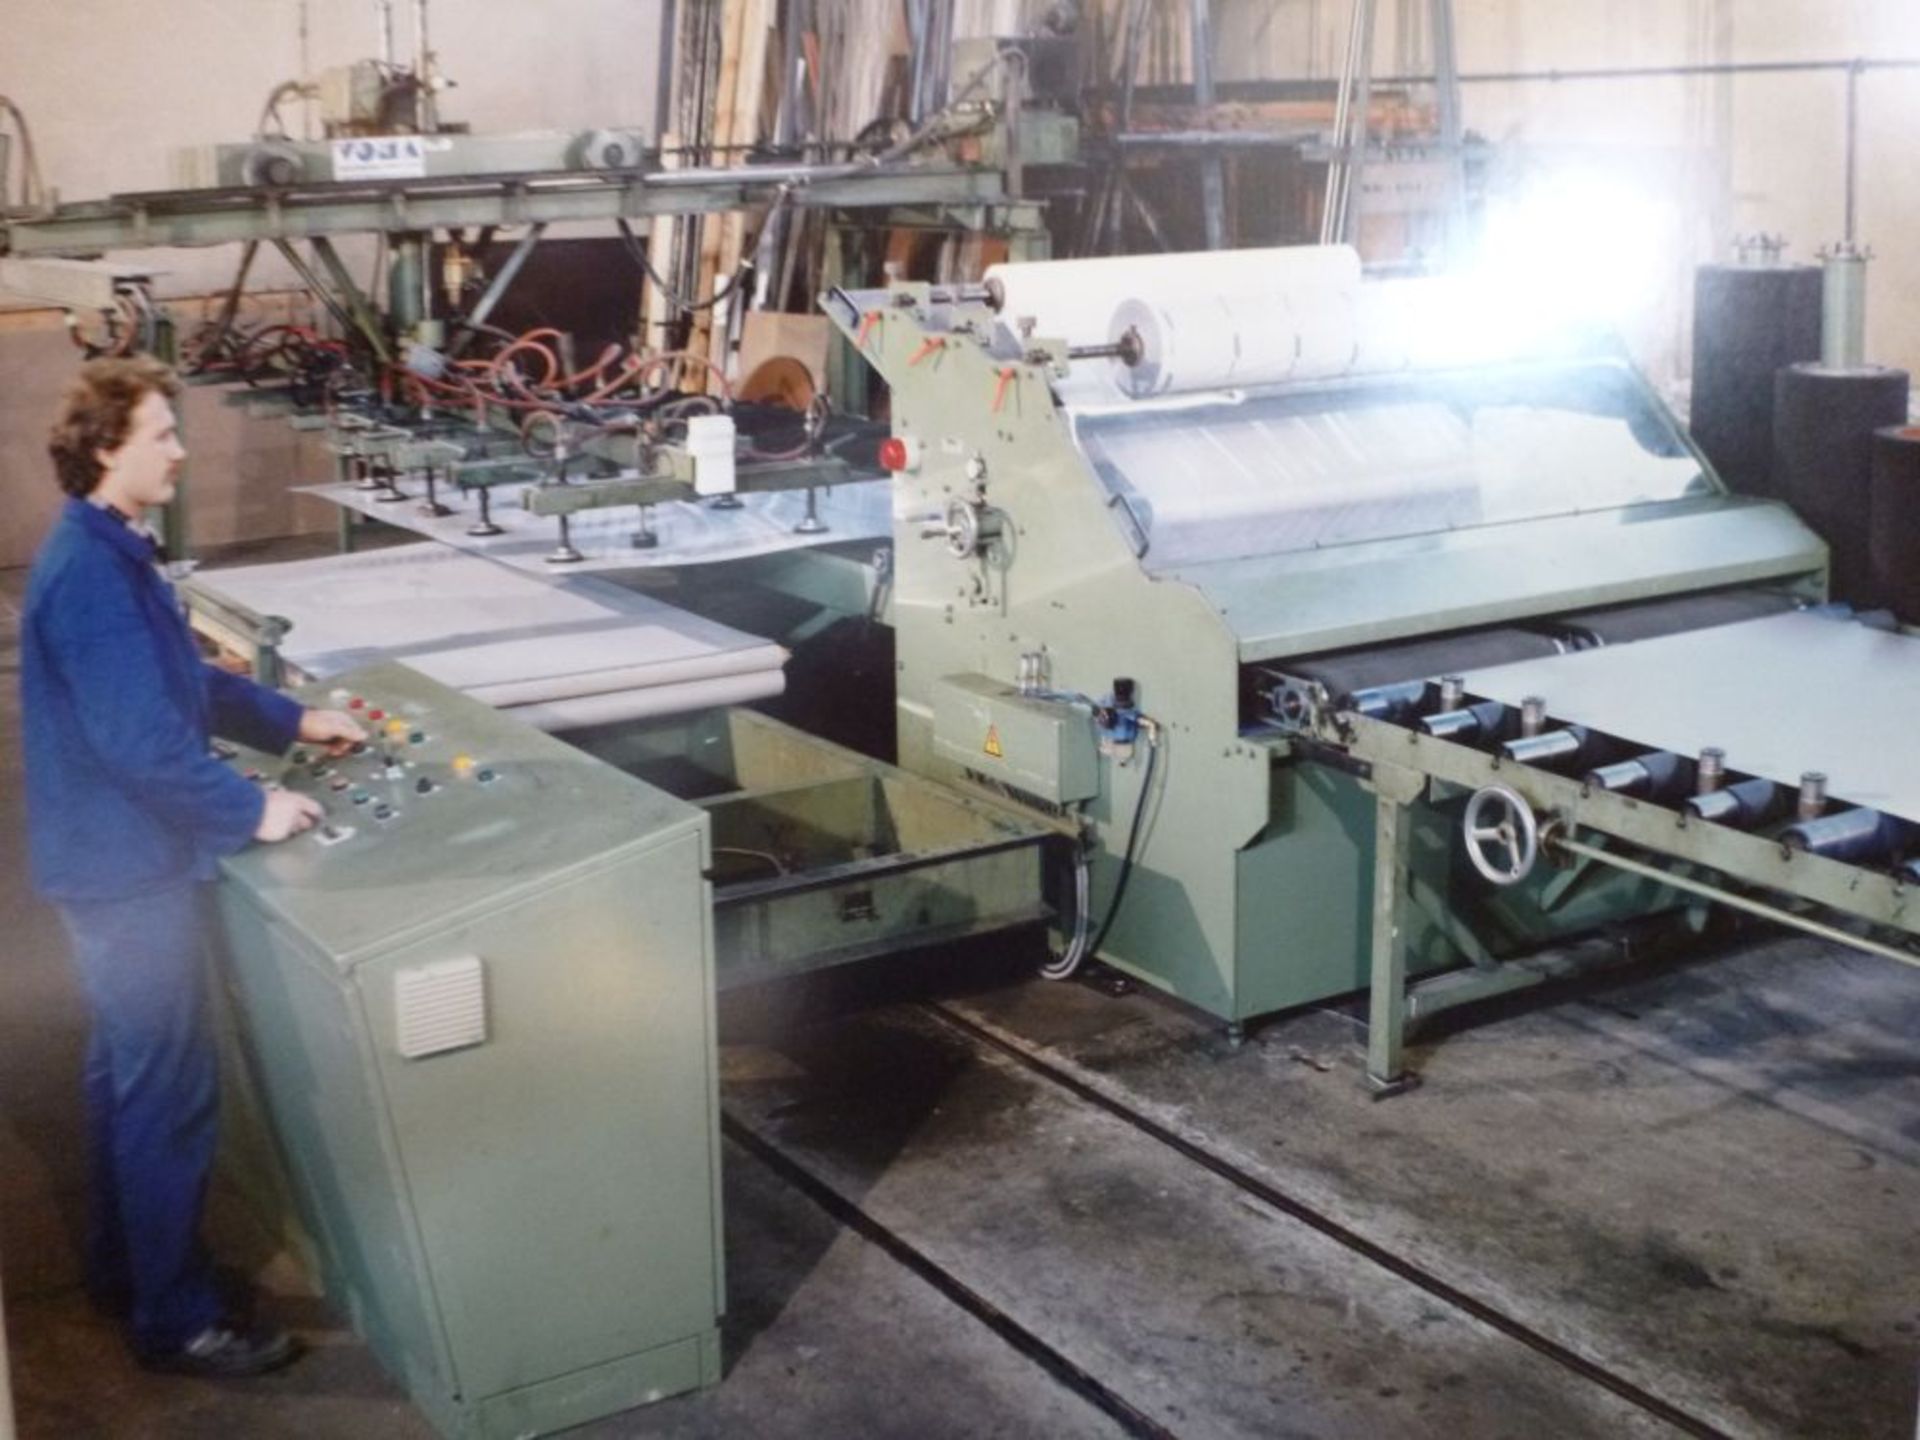 Burkle Plastic Film Applicator - YOM: Approx 1965; Width: 1600mm; Applies protective plastic film to - Image 12 of 17